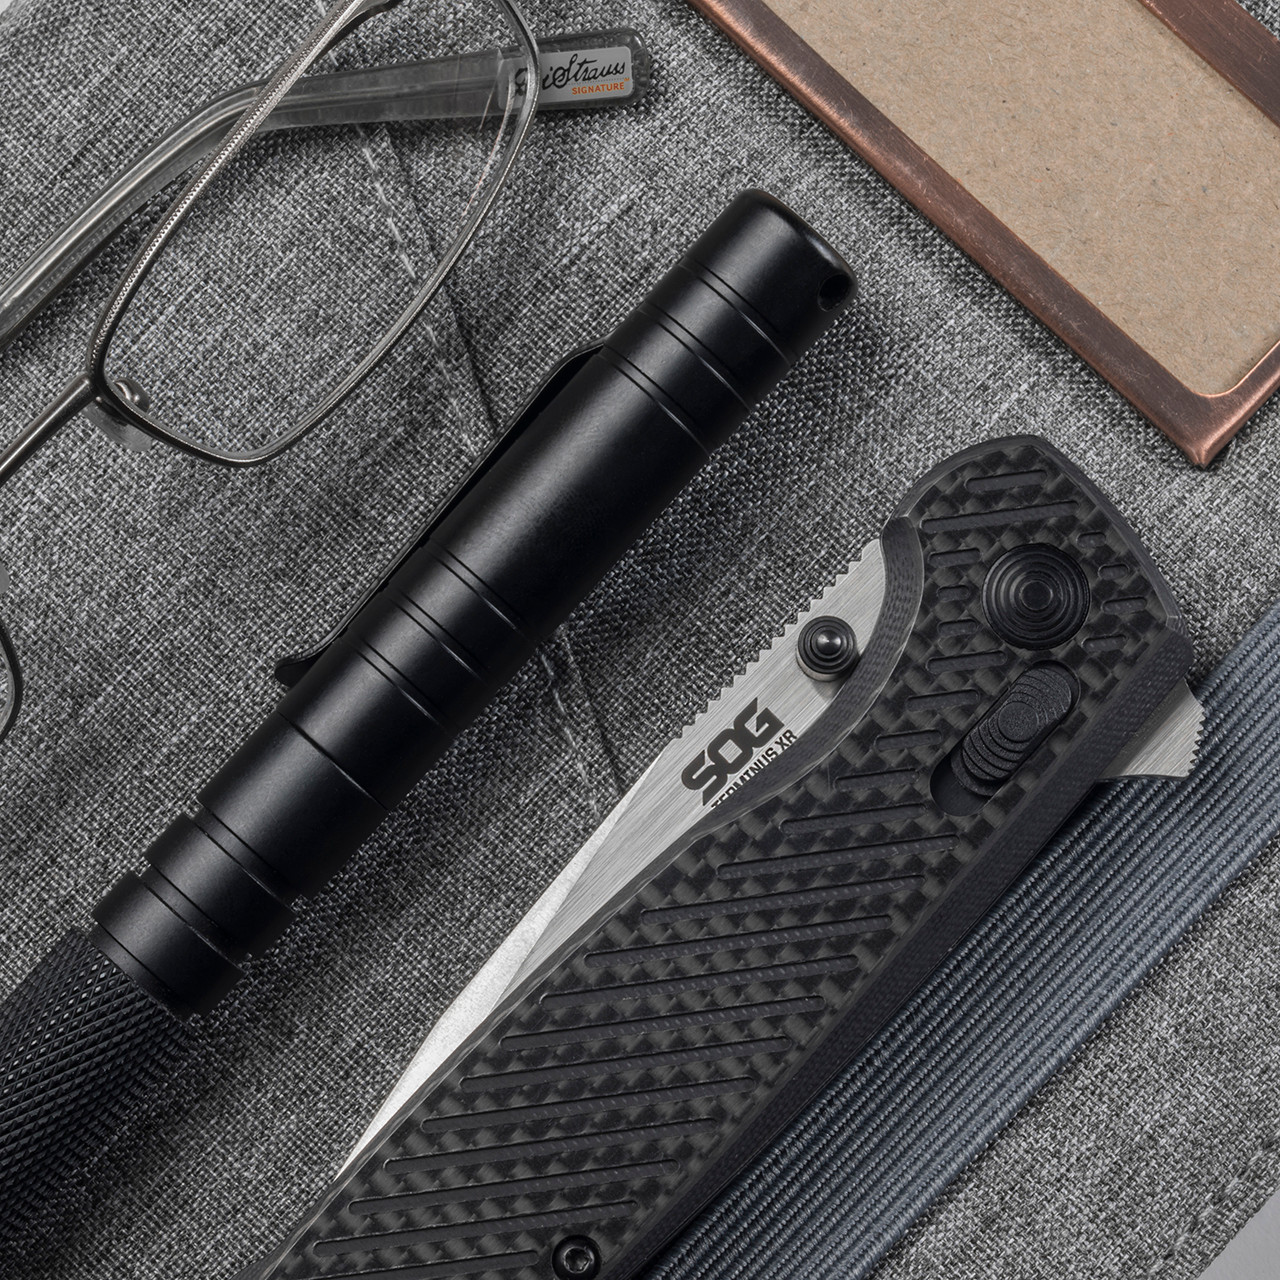 Terminus XR - S35VN | Daily Carry Folding Knife